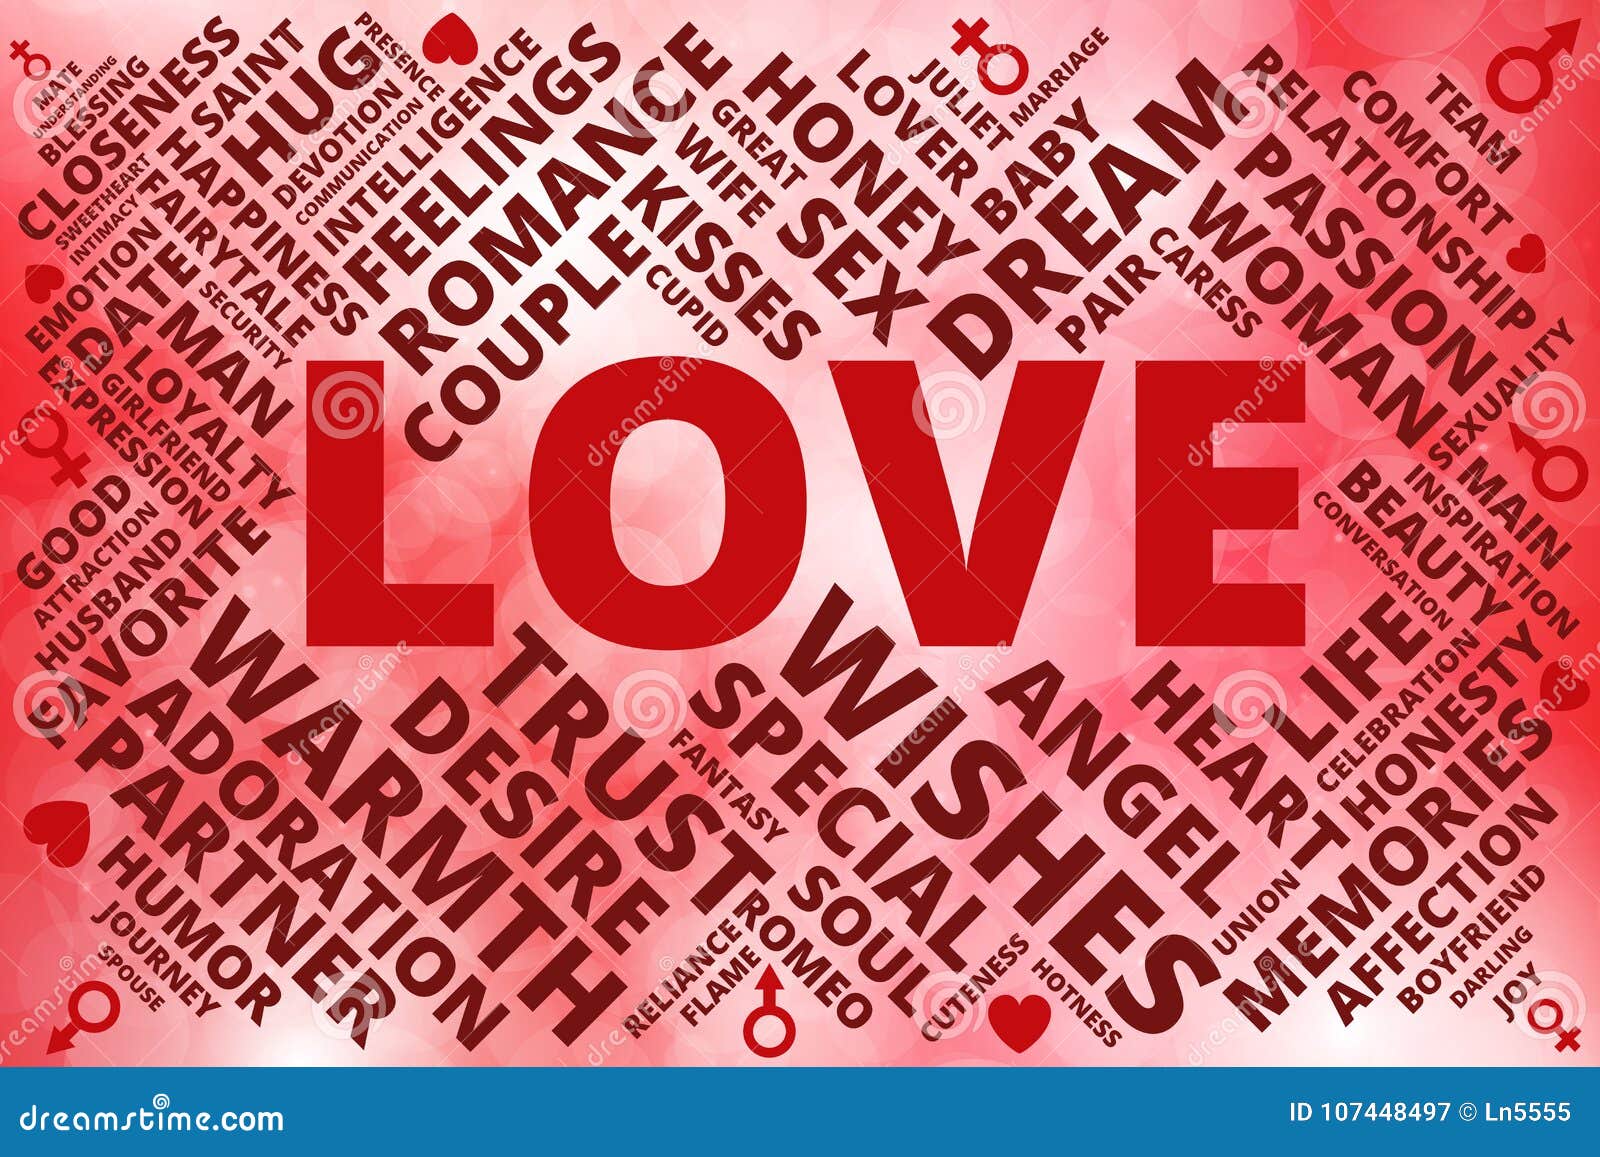 Love Related Words Cloud Collage of Red Shades with Hearts, Man and